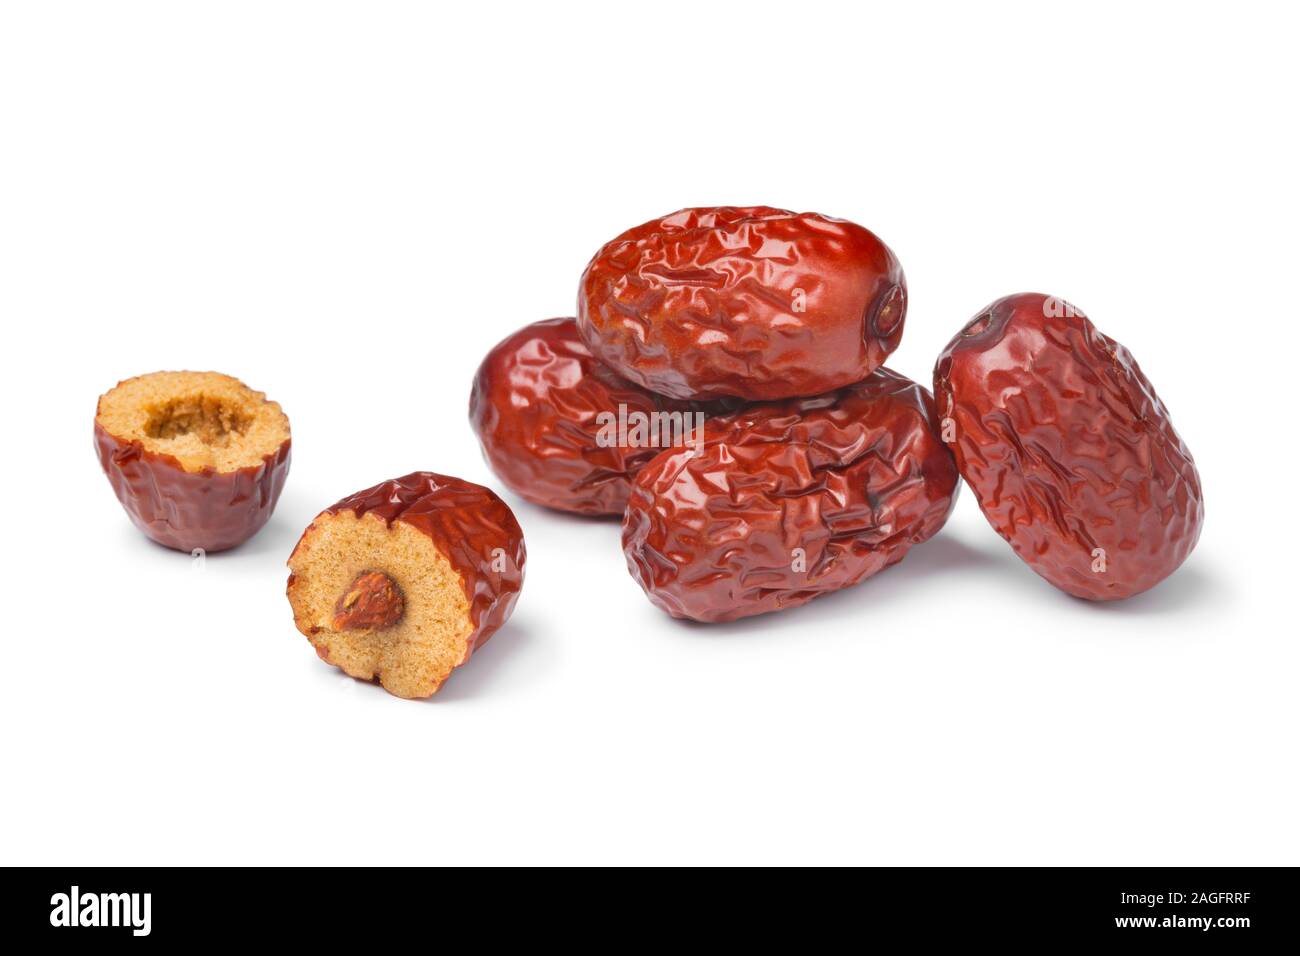 Heap of whole dried Chinese red dates and a halved one solated on white background Stock Photo